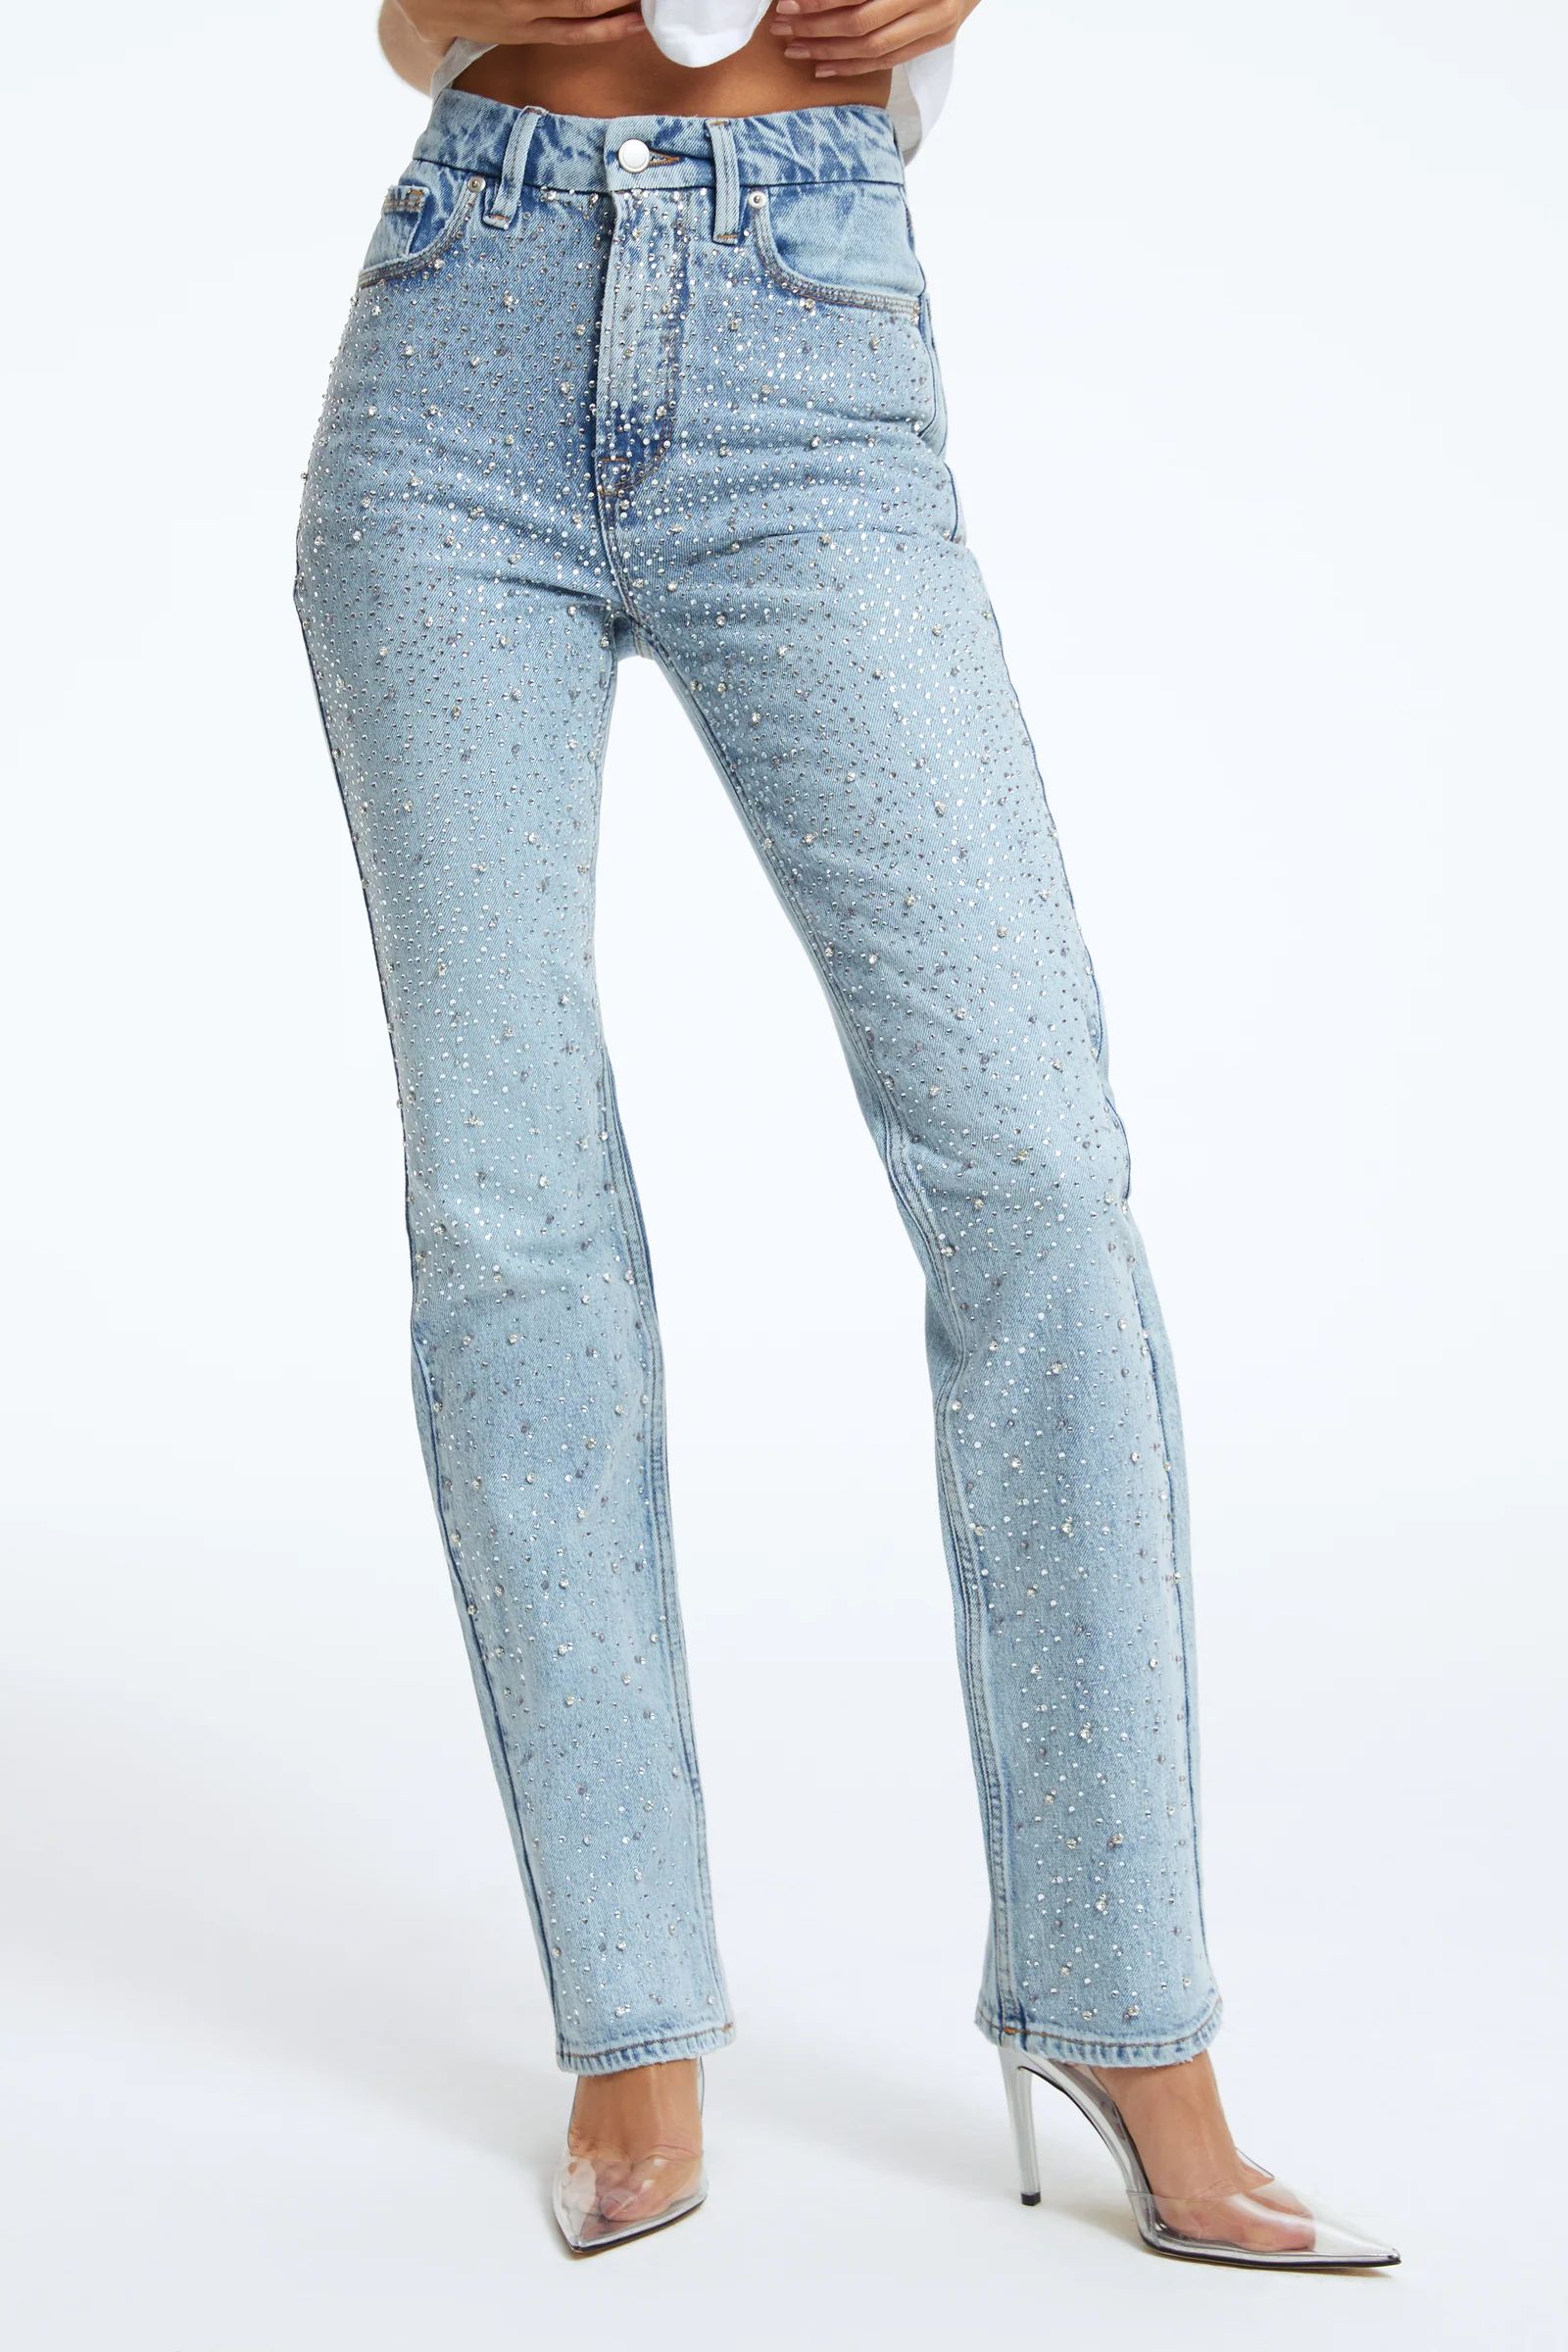 GOOD ICON DIAMOND DUSTED JEANS | BLUE953 | Good American